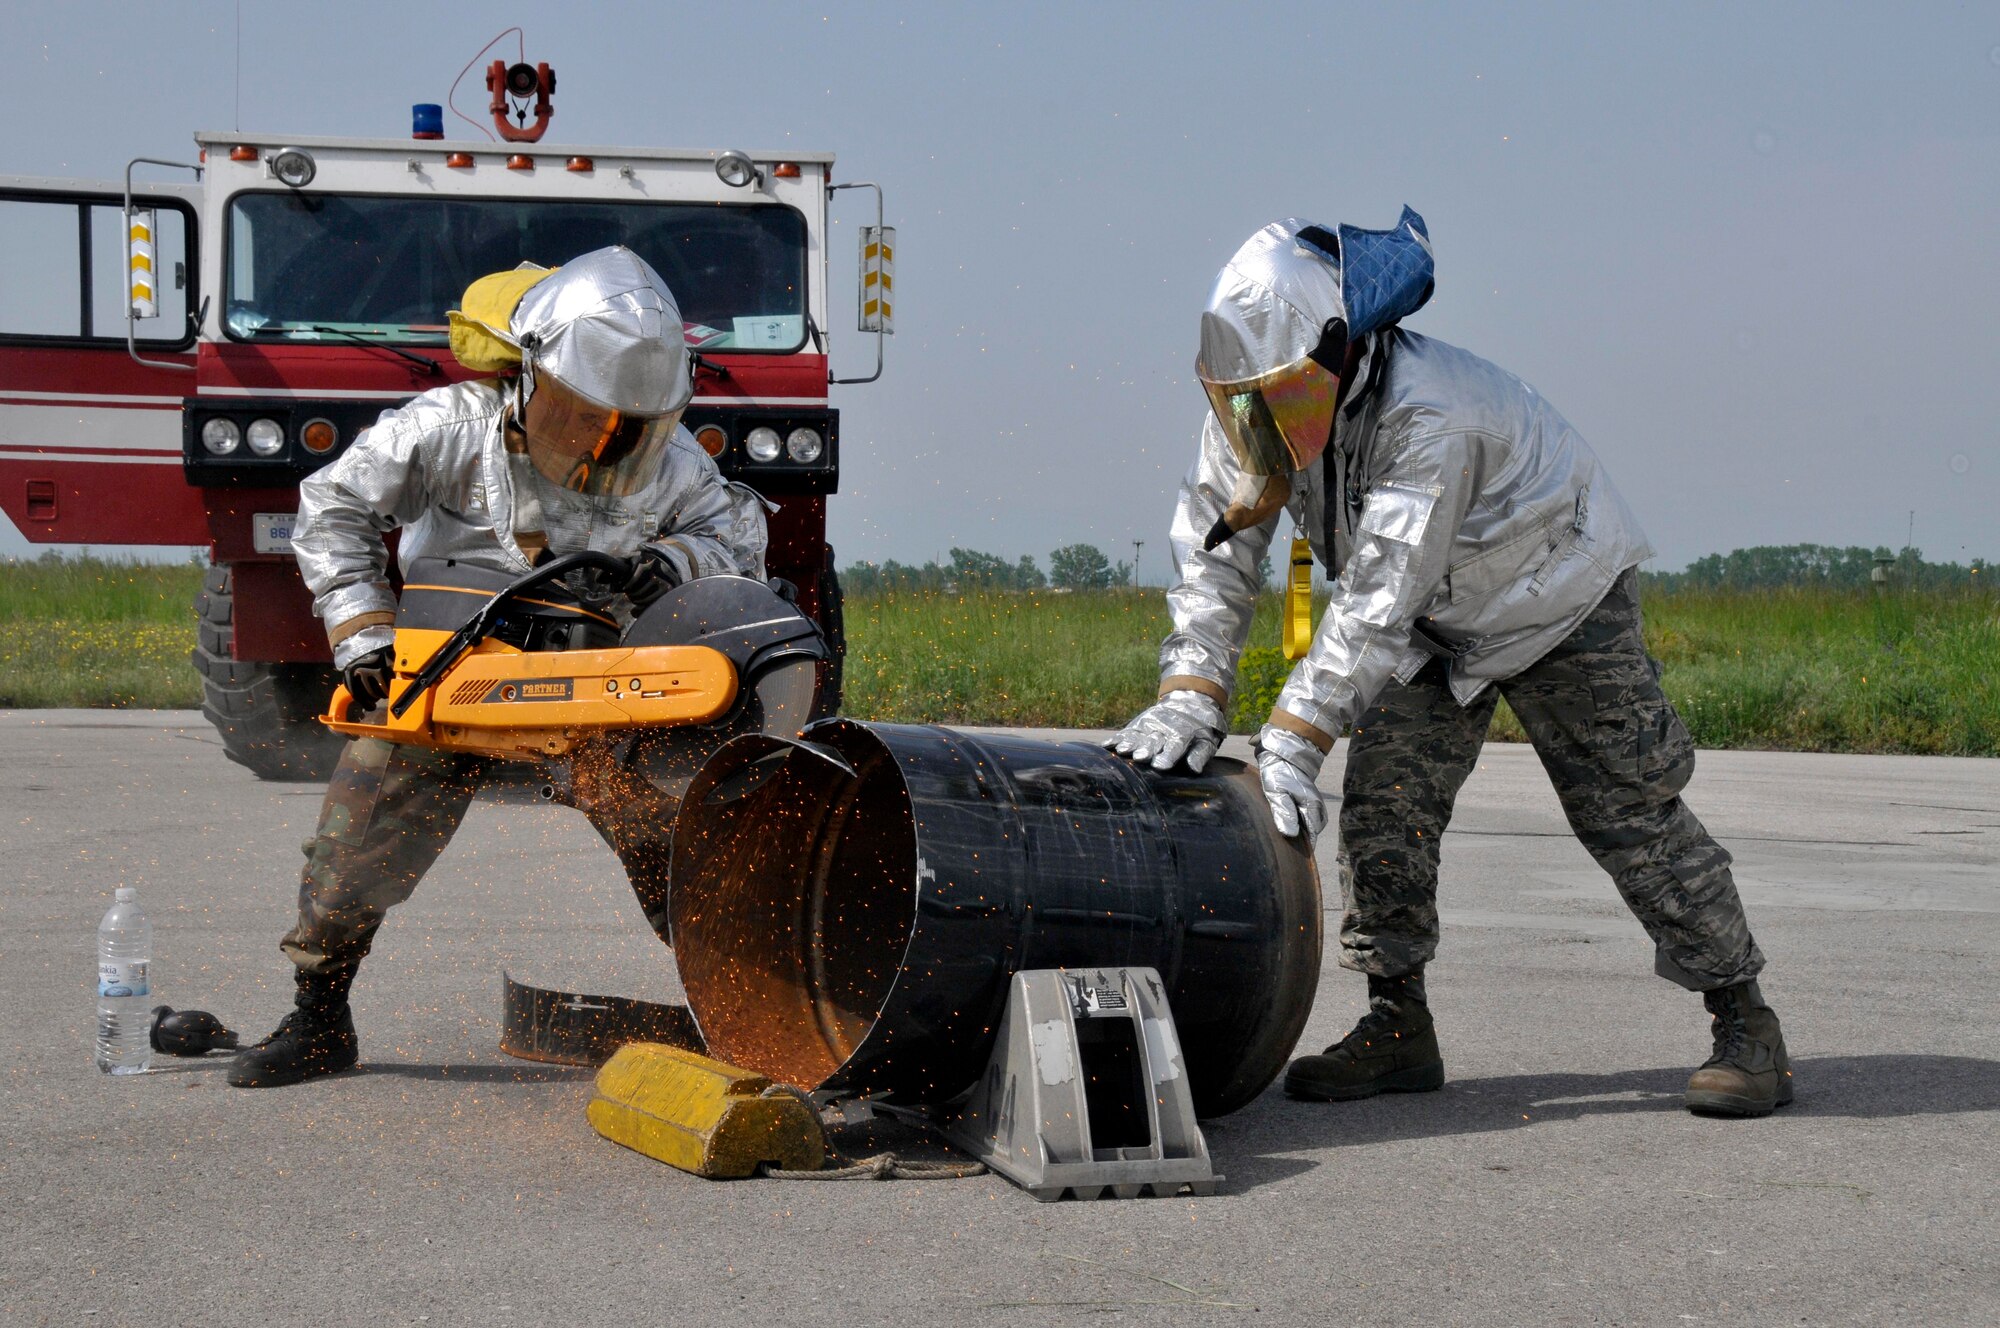 GRAF IGNATIEVO AIR FORCE BASE, Bulgaria - Airmen 1st Class Phil Crews and Jared Williams, 48th Civil Engineer Squadron firefighters, make a burn barrel at Graf Ignatievo Air Force Base, Bulgaria, May 13, for the destruction of classified material. Making the burn barrel allows the firefighters to maintain proficiency on the K-12 rescue saw. The Airmen are in Bulgaria as part of Sentry Gold, a joint U.S. and Bulgarian exercise.